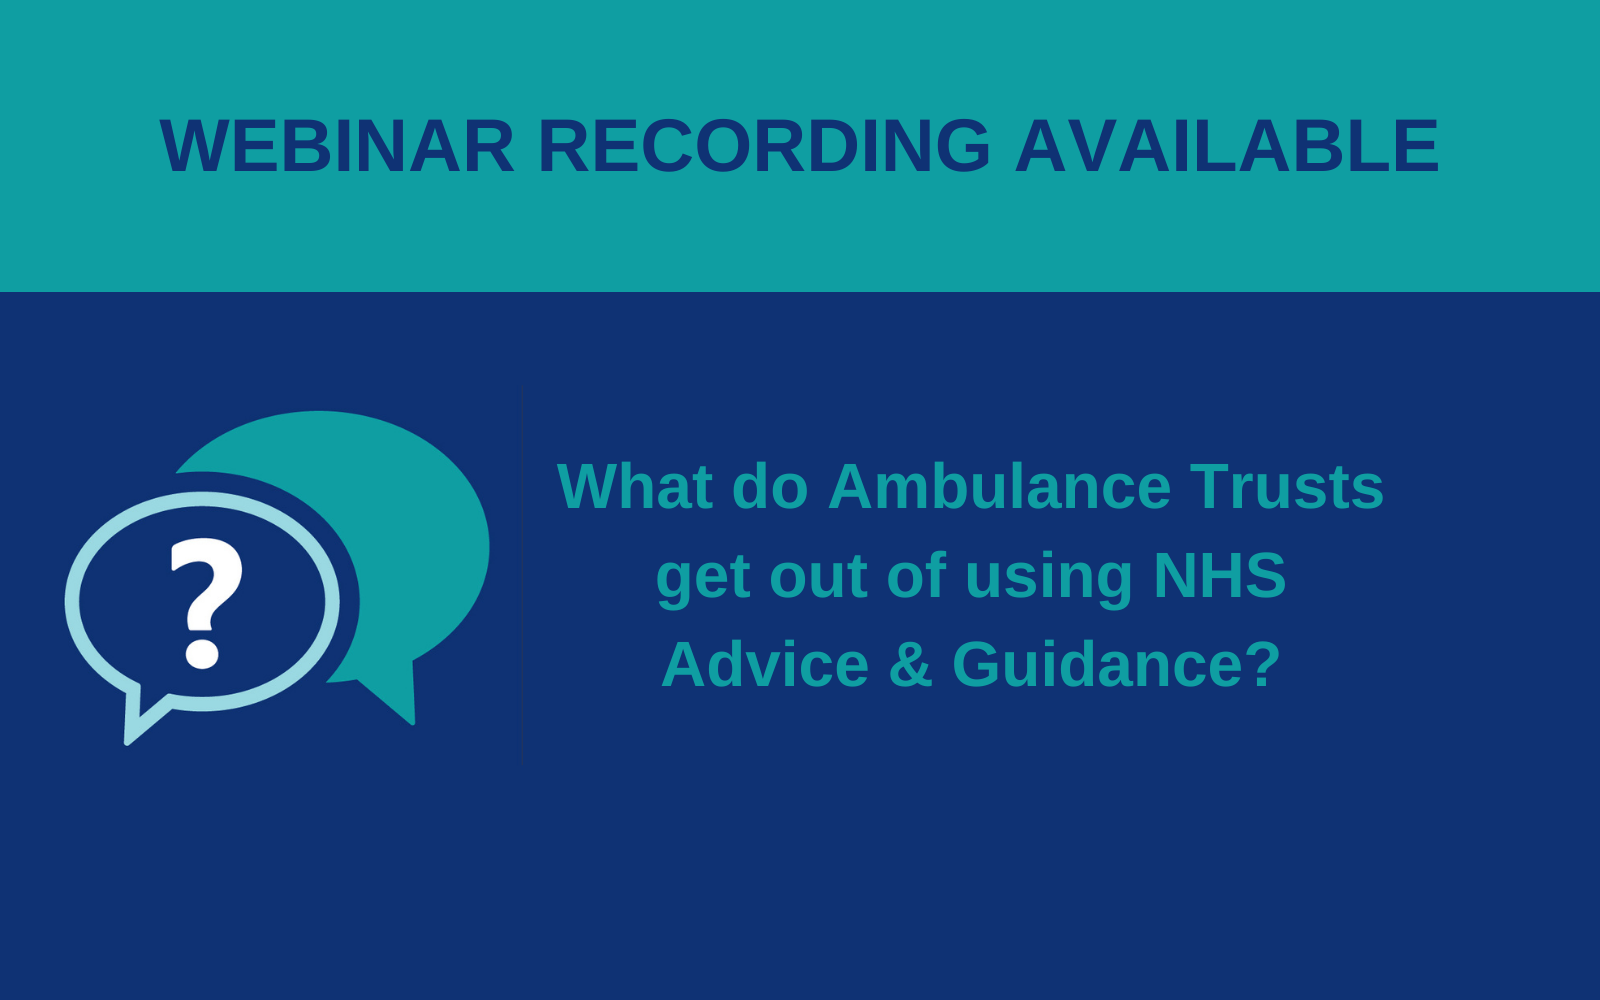 What do Ambulance Trusts get out of using A&G? – Webinar - Consultant Connect